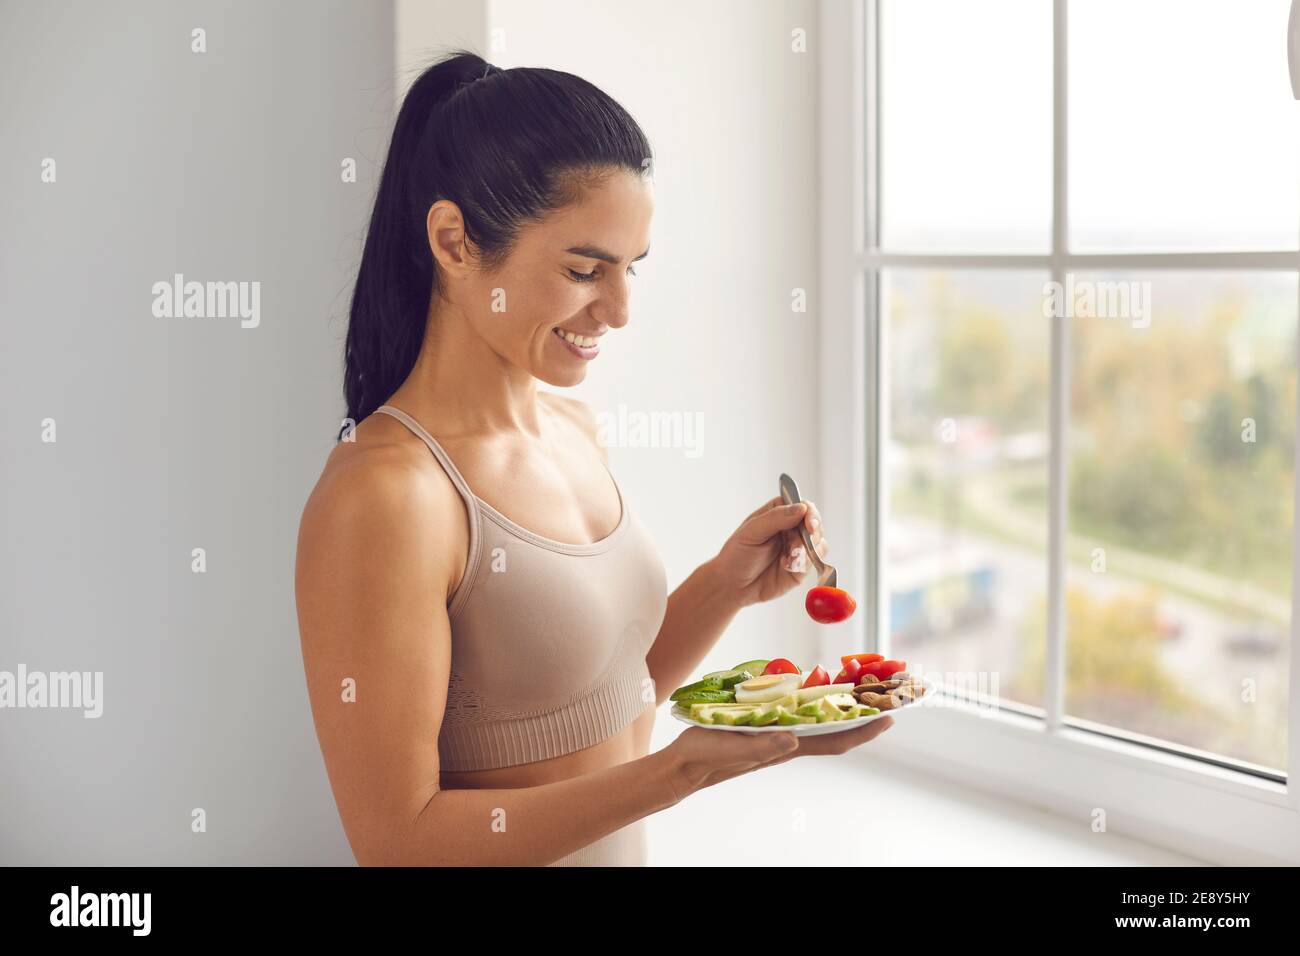 Fitness woman eating balanced healthy meal before or after workout Stock Photo